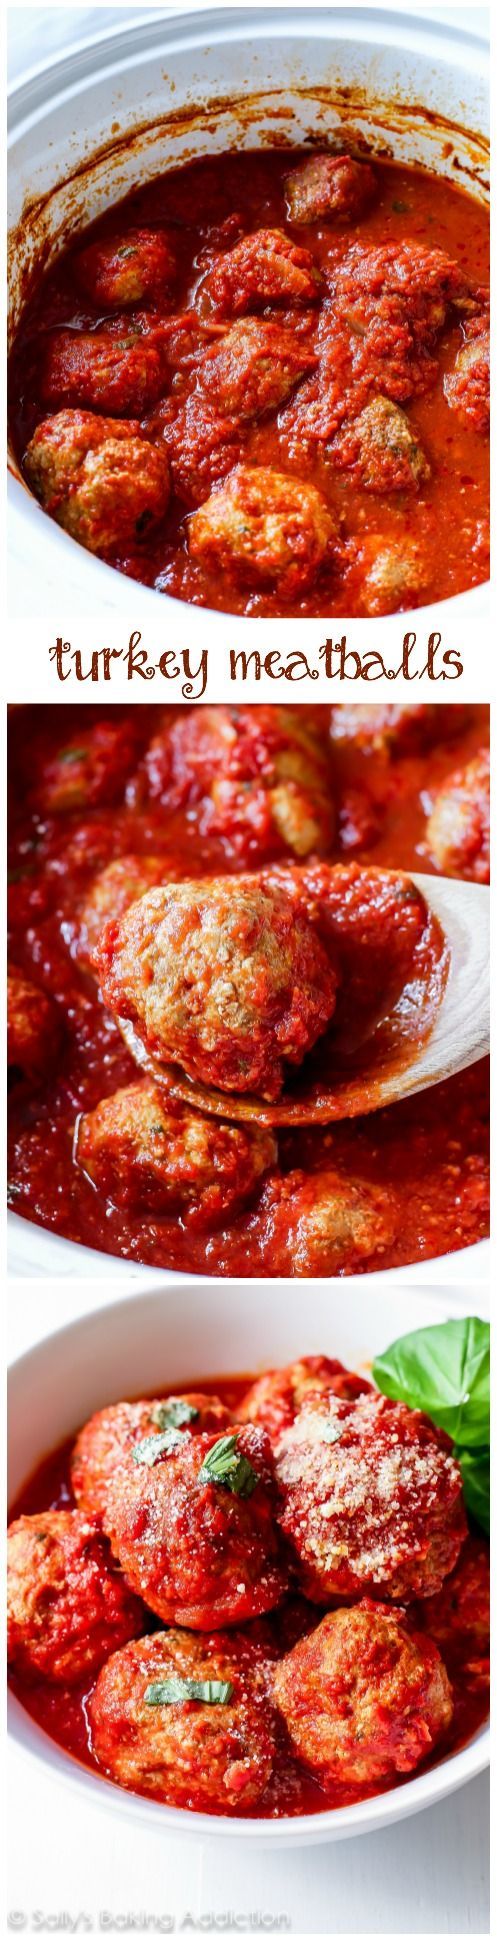 This is my favorite recipe for classic crockpot turkey meatballs! They’re spiced just right, incredibly tender, filled with tons